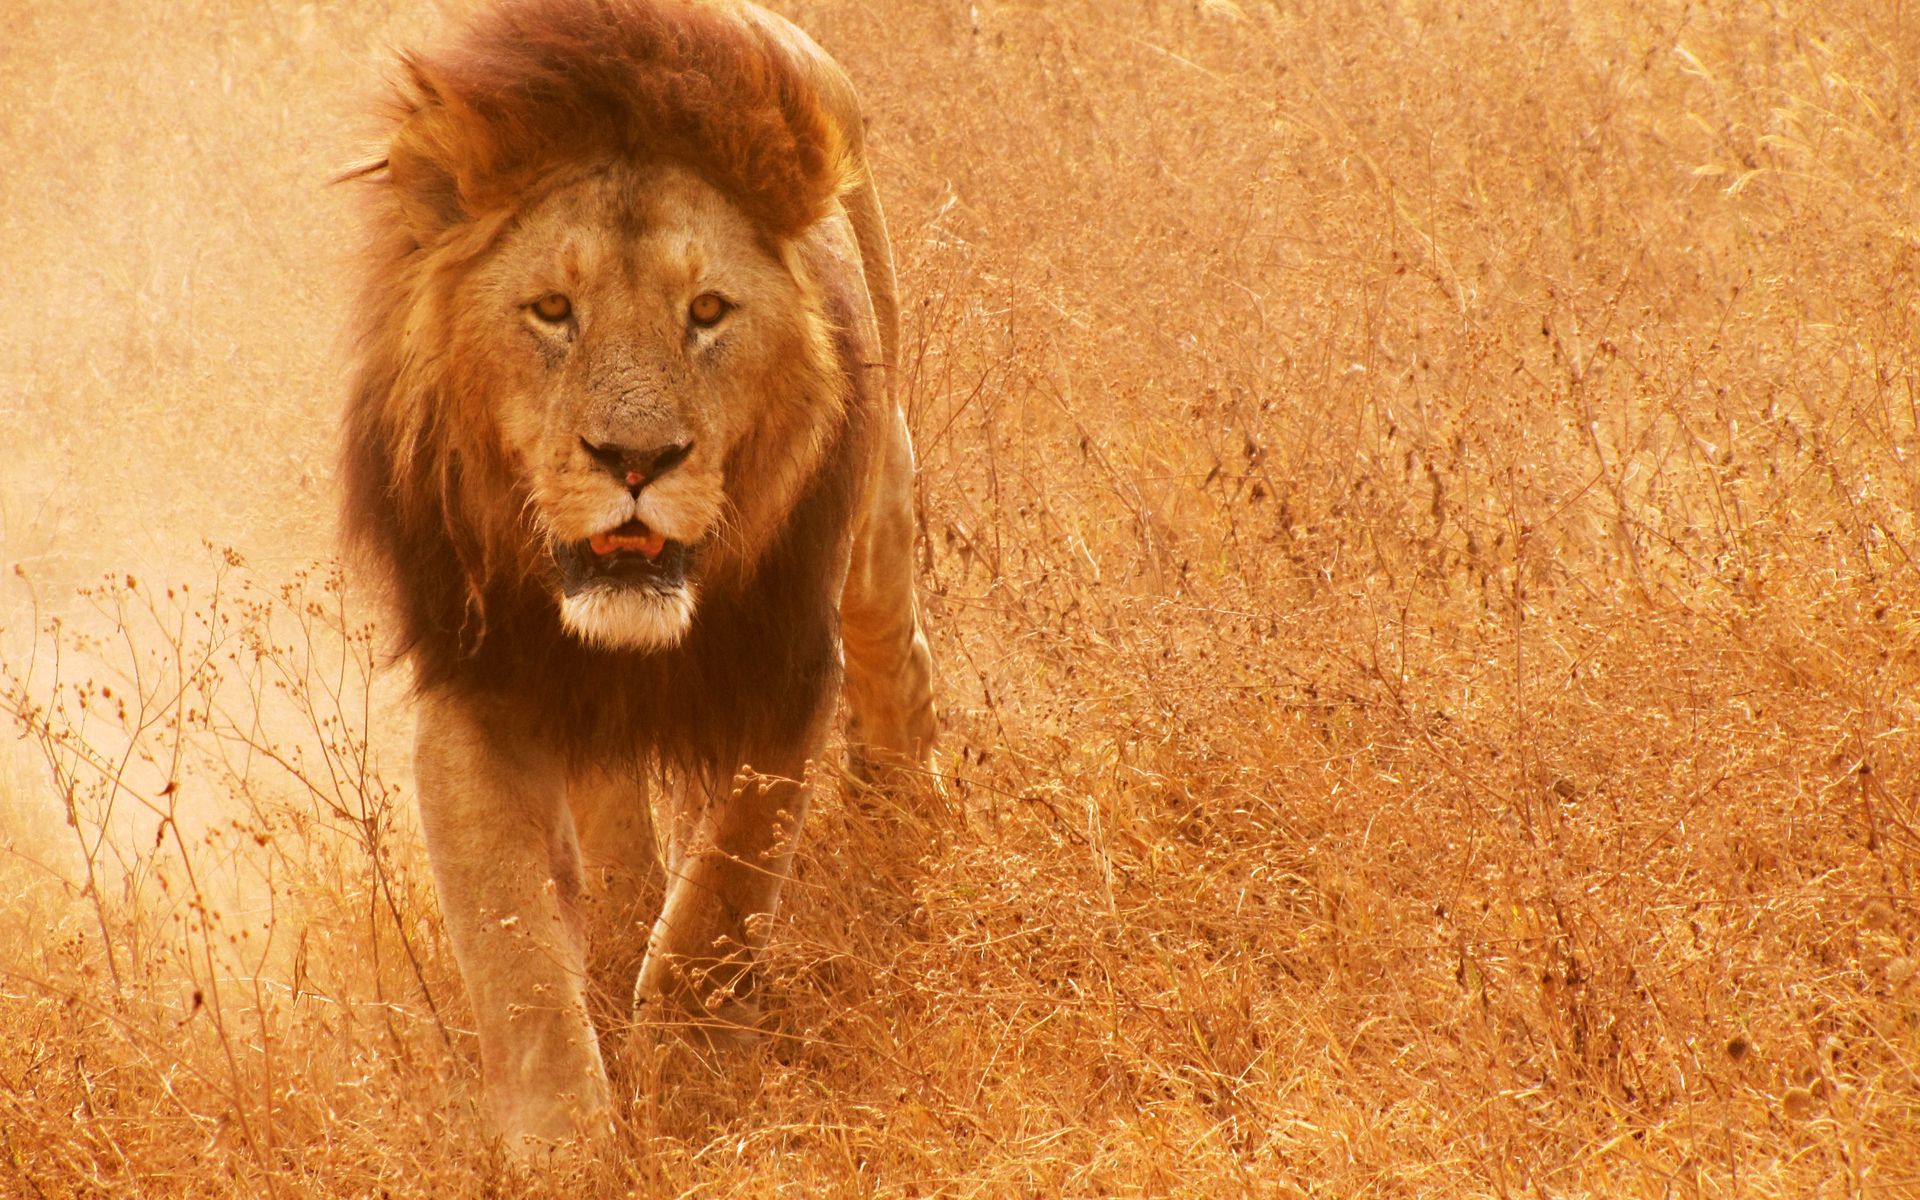 Lion Pictures - The Powerful African Cats - Picsy Buzz